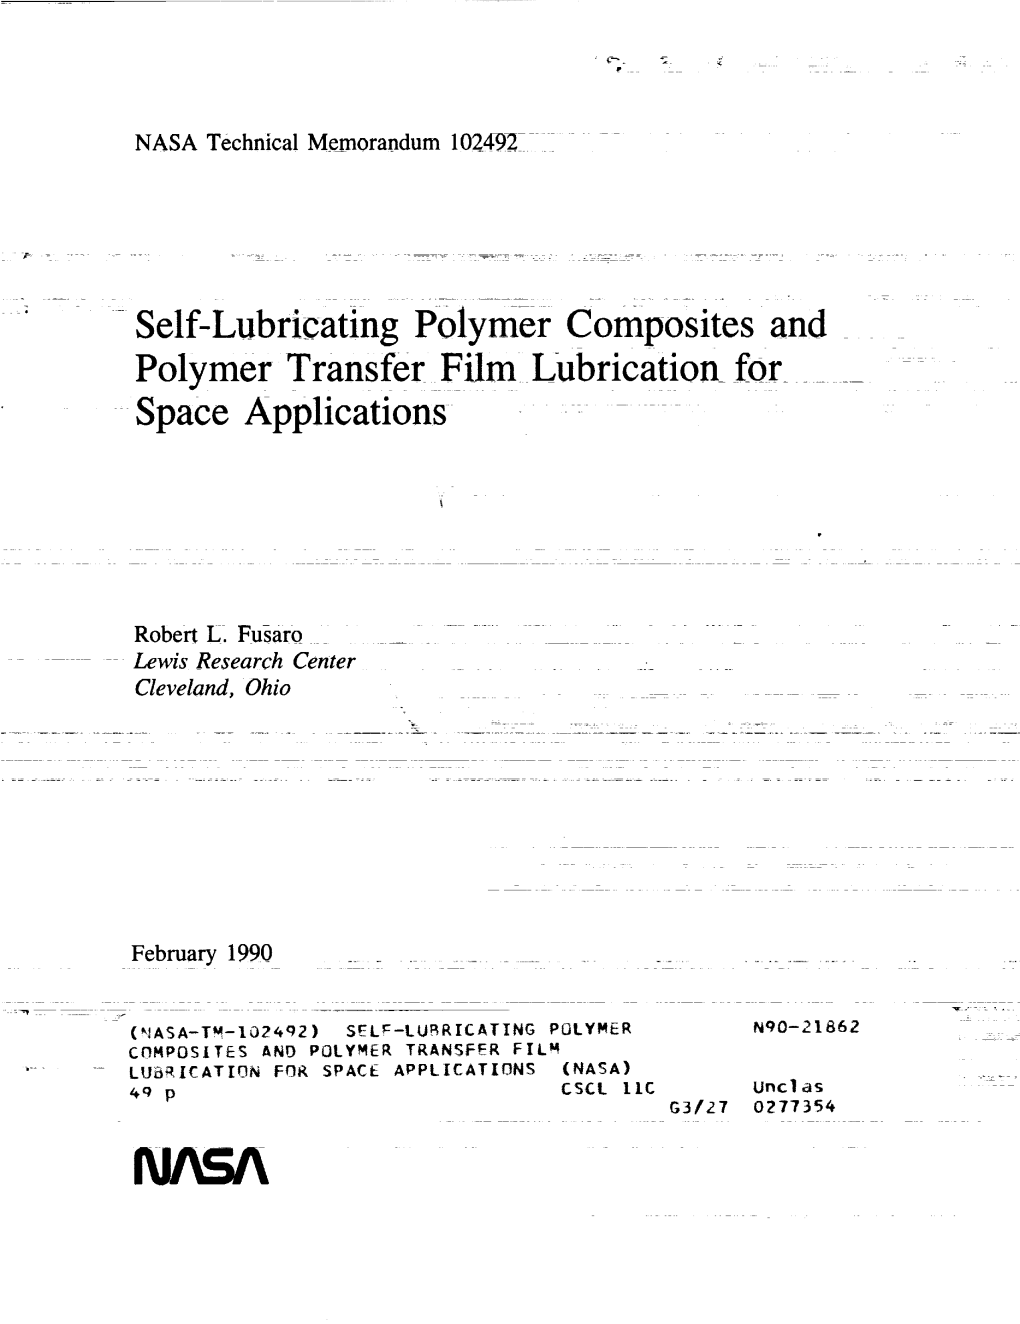 Self-Lubricating Polymer Composites and Polymer Transfer Film Lubrication for